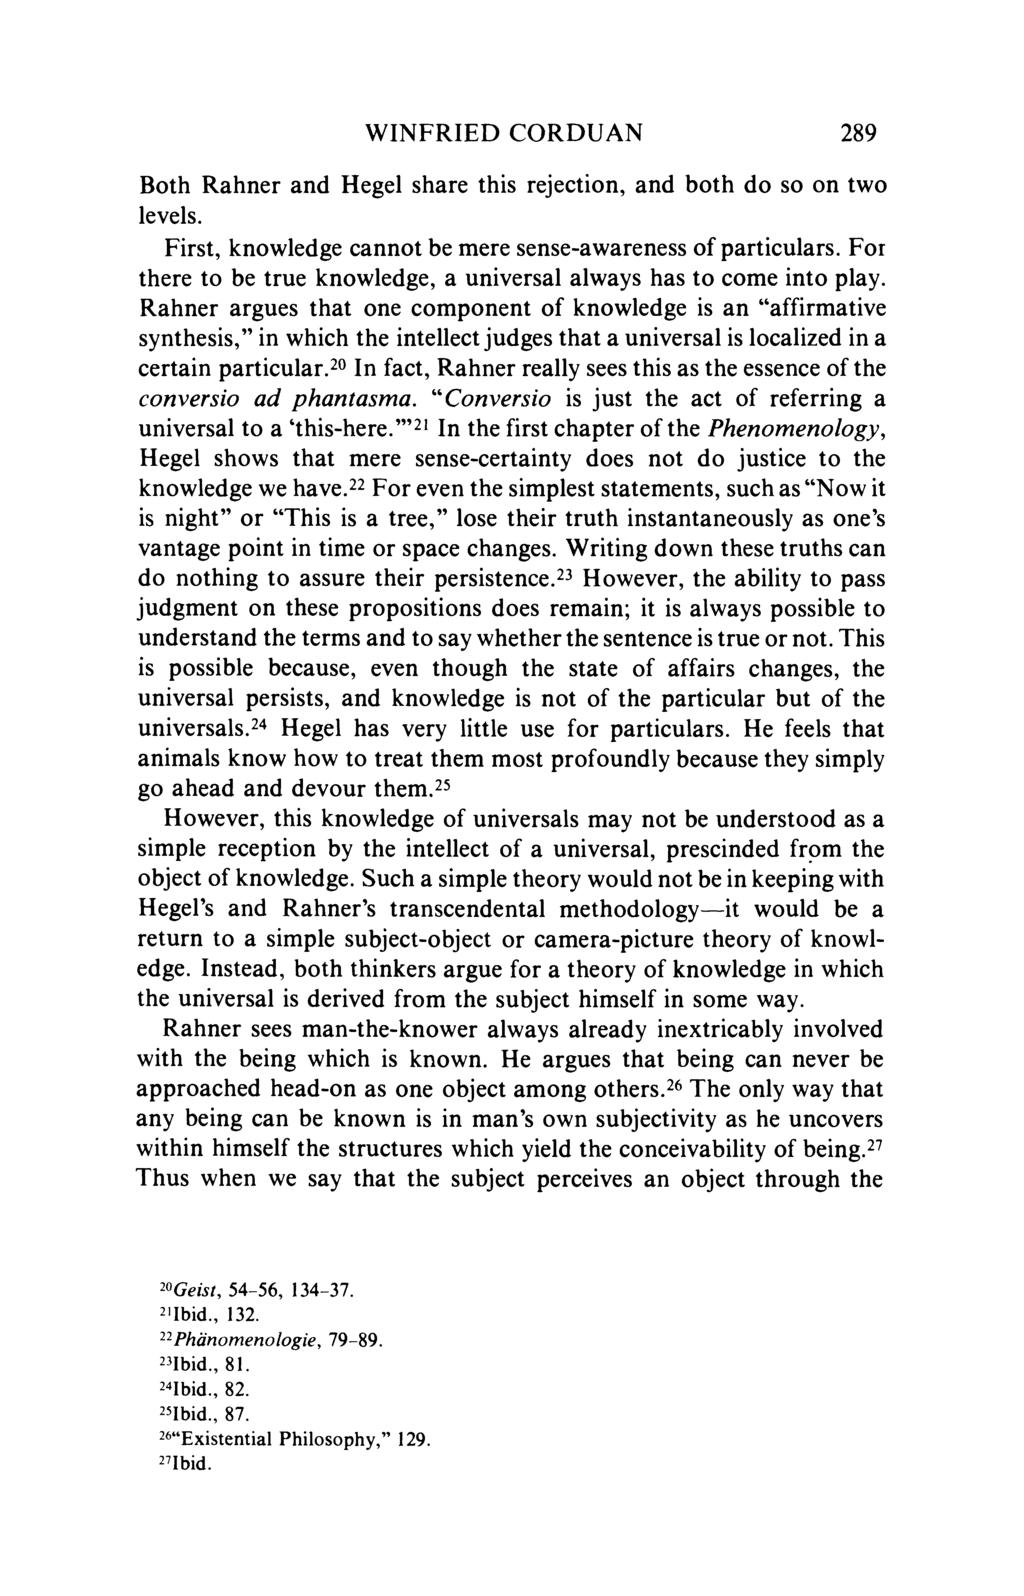 WINFRIED CORDUAN 289 Both Rahner and Hegel share this rejection, and both do so on two levels. First, knowledge cannot be mere sense-awareness of particulars.